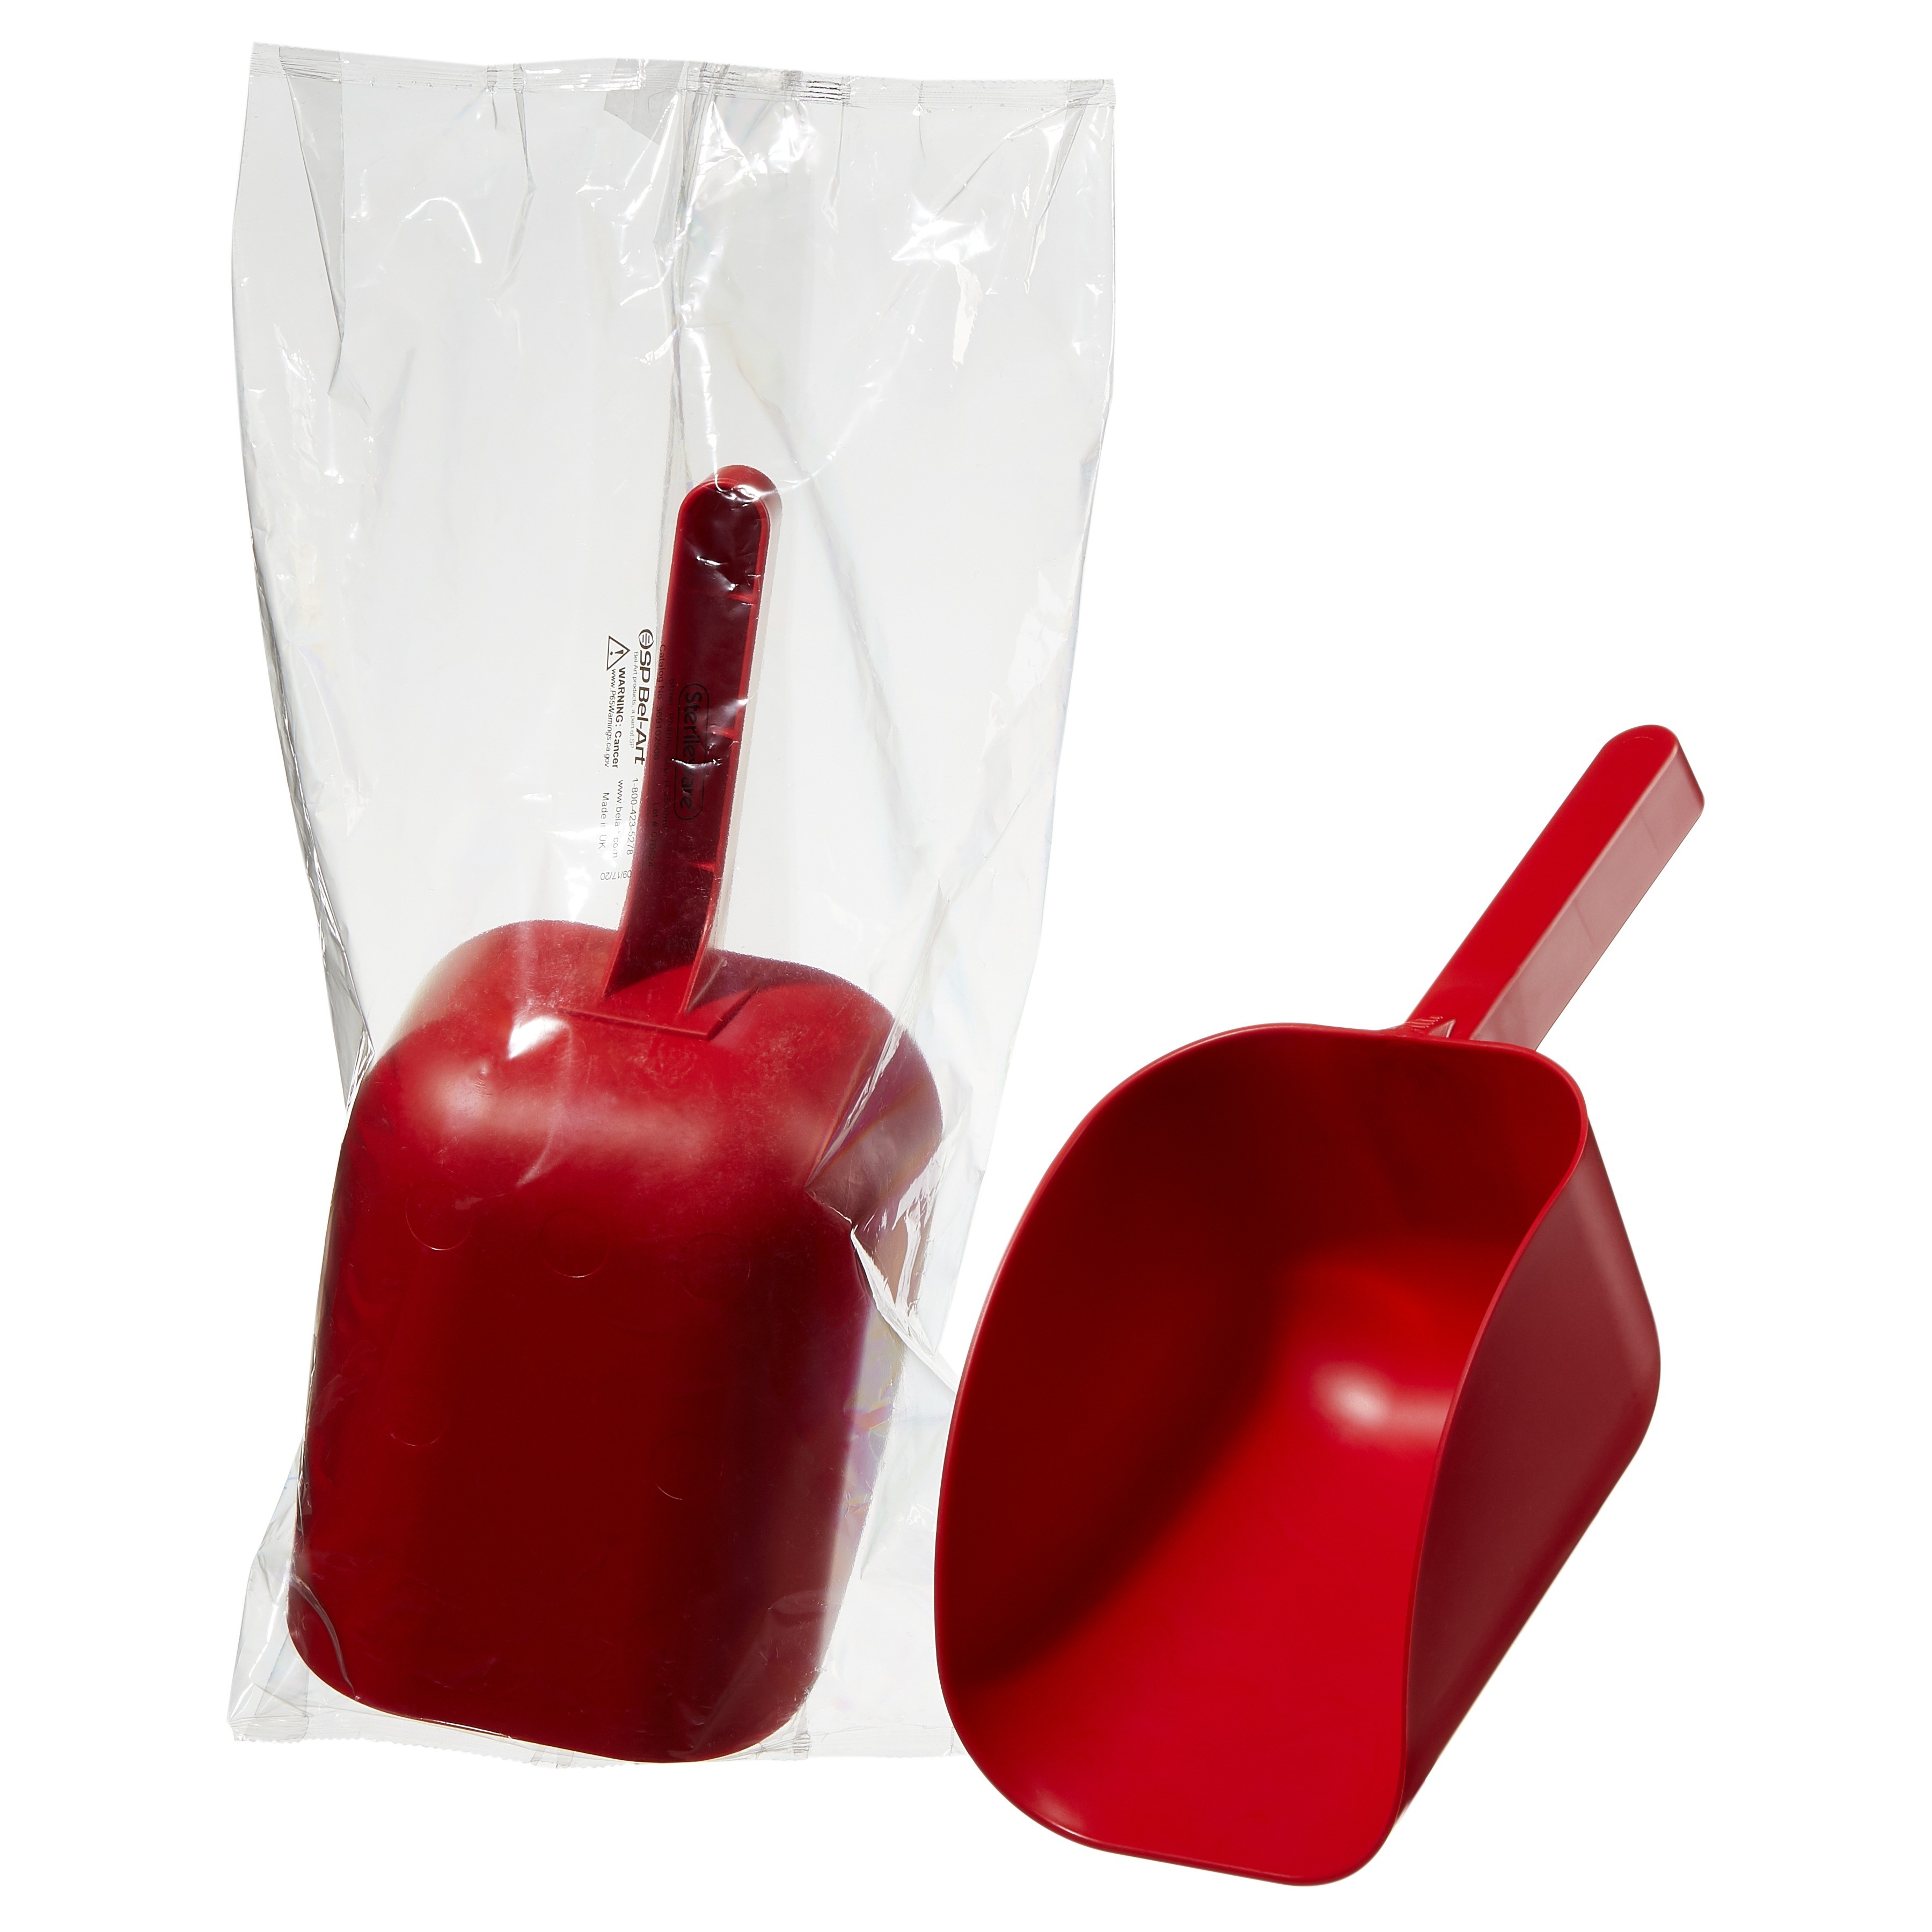 Sterileware Pharma Scoops - Red; 2500ml (85oz), Individually Wrapped (Pack of 15)